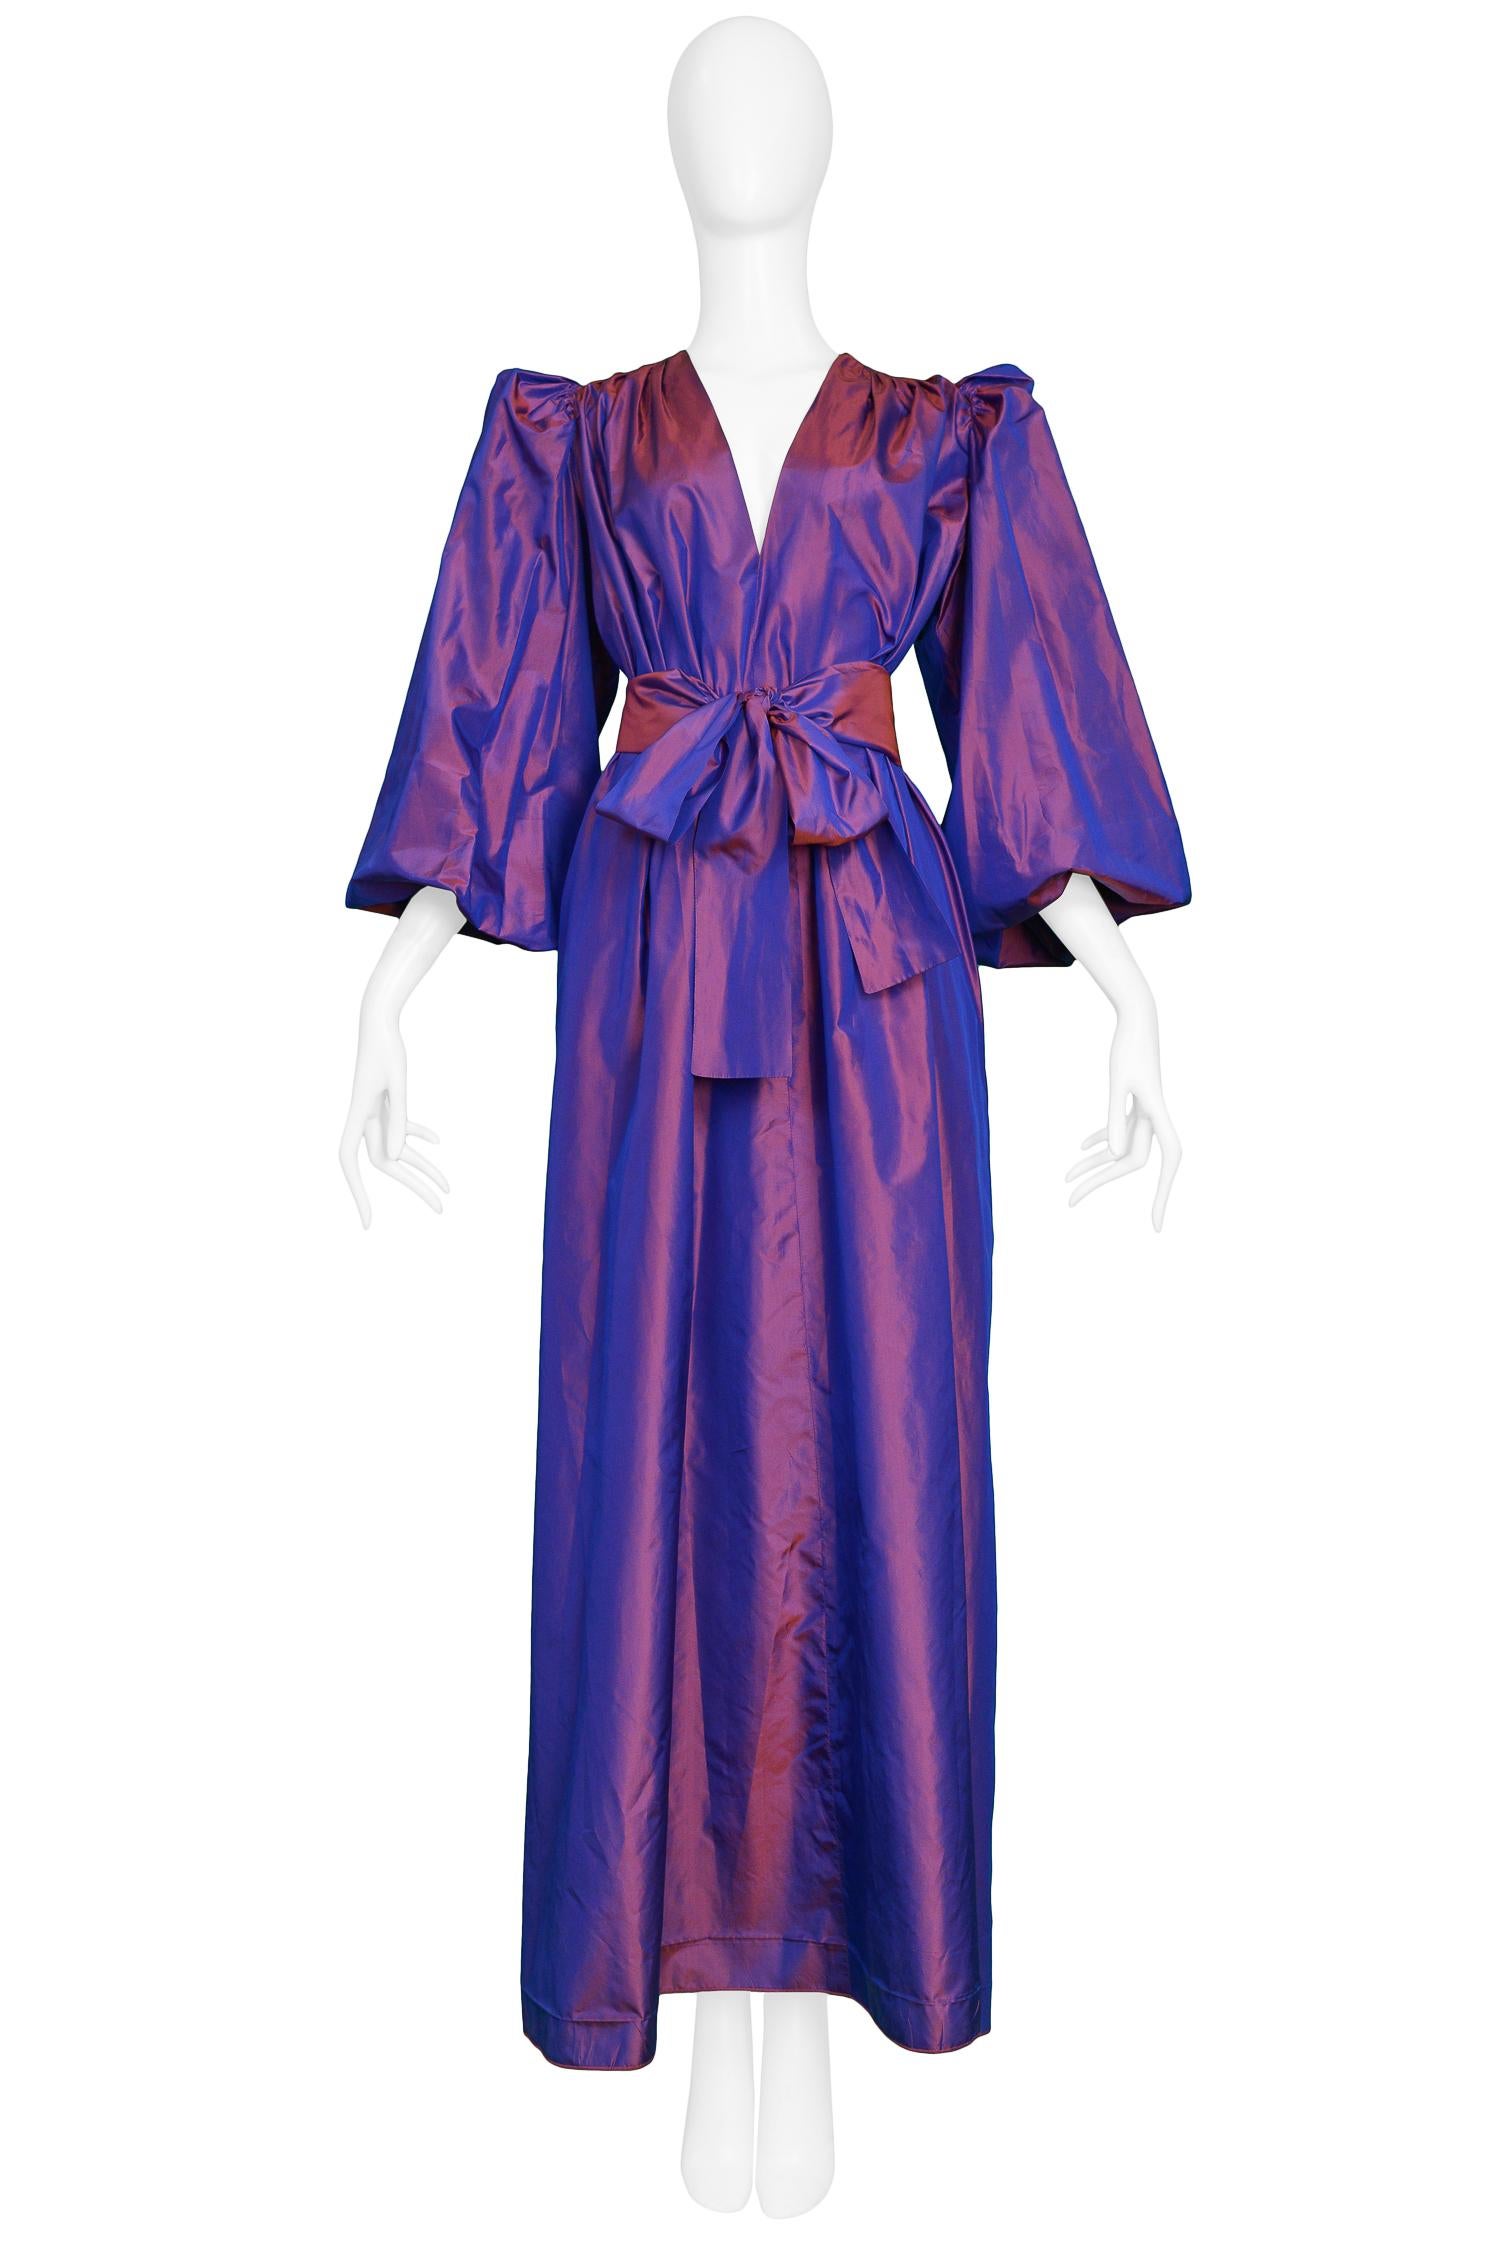 Vintage 1980s Yves Saint Laurent purple metallic taffeta gown featuring blouson sleeves with gathering at the shoulders, open neckline & sash that ties at the waist. 

Excellent Condition.

Size: 40 
